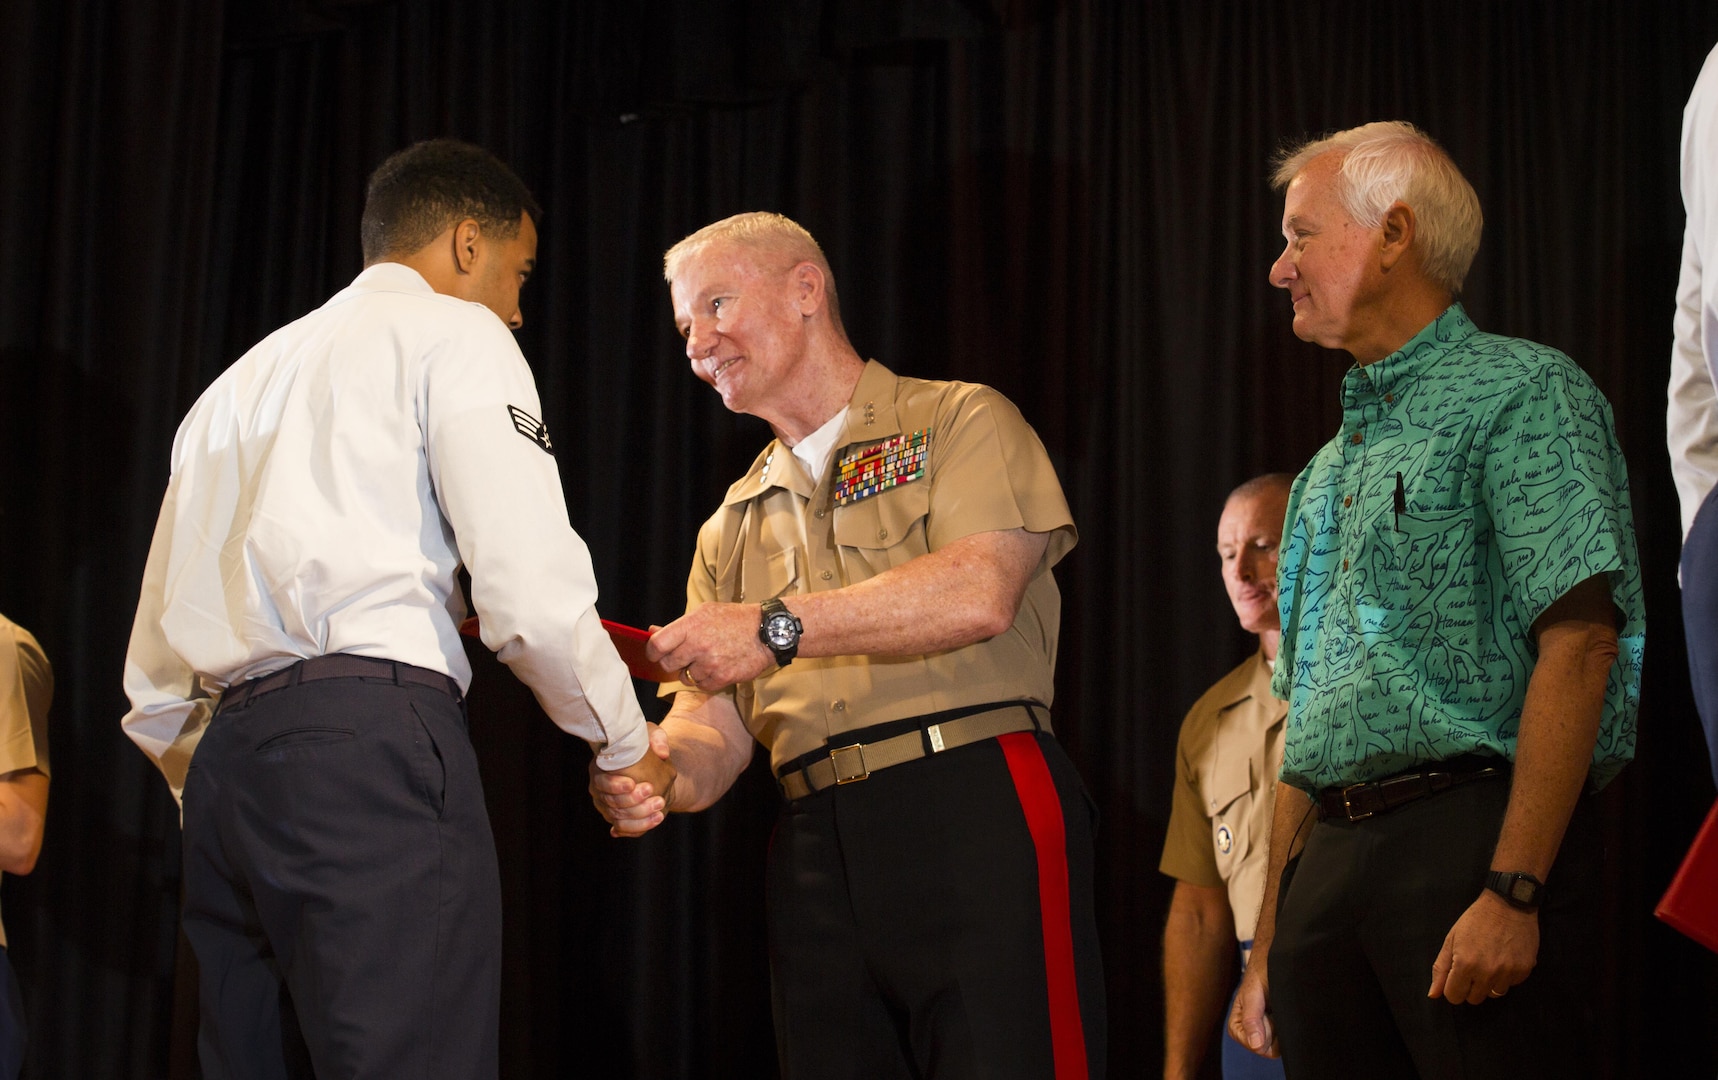 U.S. Air Force Senior Airman Marcus Griffin (left), receives an award from Lt. Gen. John A. Toolan (middle), commander, U.S. Marine Corps Forces, Pacific, and Mayor Kirk Caldwell (right), City & County of Honolulu, during the First Responder Recognition Ceremony at the Neal S. Blaisdell Center, in Honolulu, Dec. 18, 2015. Military and civilian personnel that selflessly assisted during the rescue and treatment of the Marines and Sailor received recognition from the U.S. Marine Corps Forces, Pacific Commander.